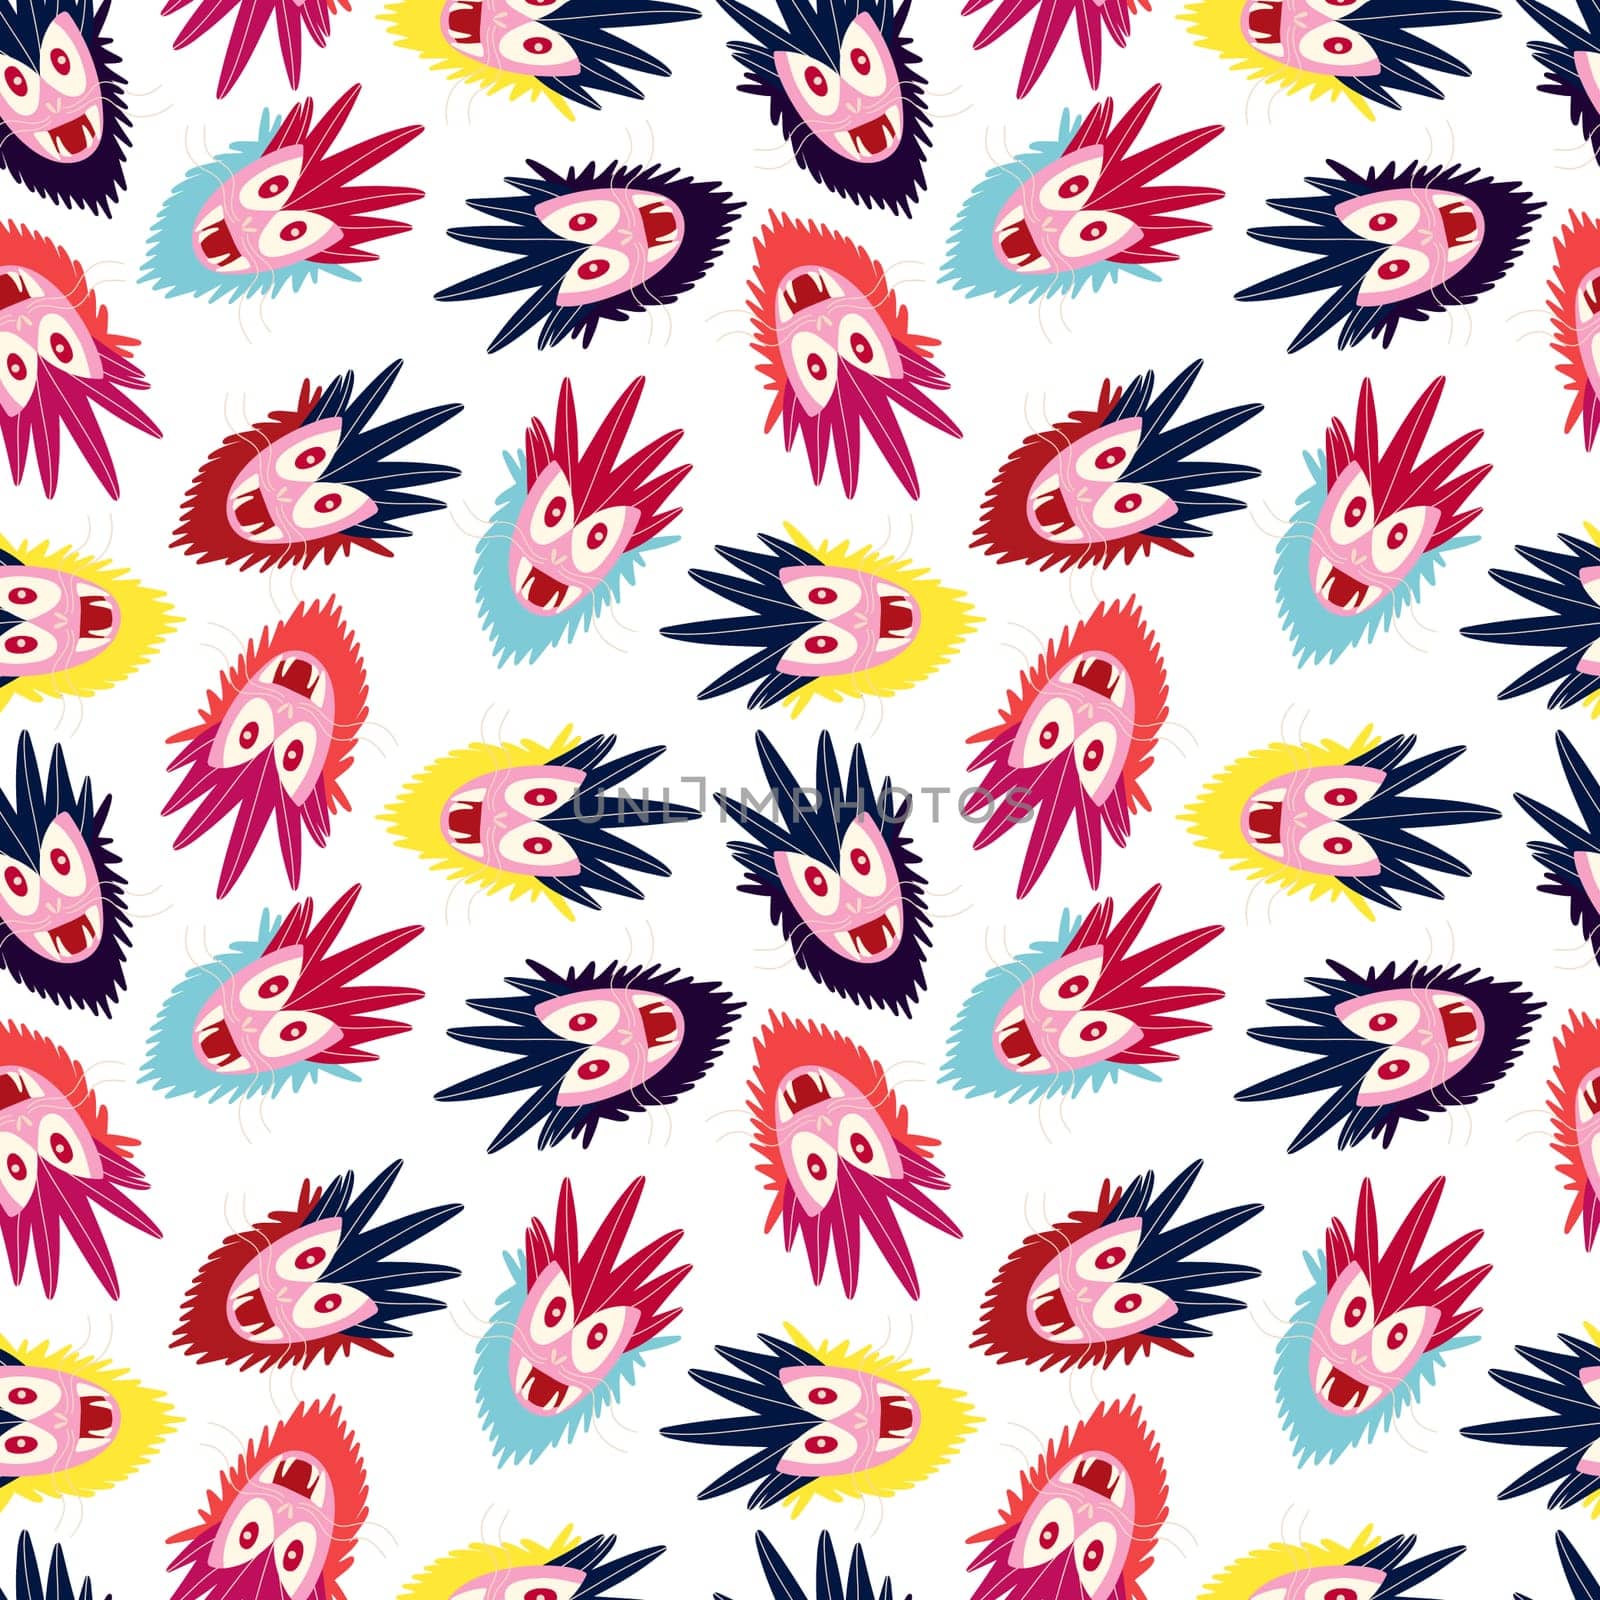 A blue and yellow pattern of cartoon faces with red eyes and mouths. The faces are all different sizes and colors, and they are arranged in a way that creates a sense of movement and energy